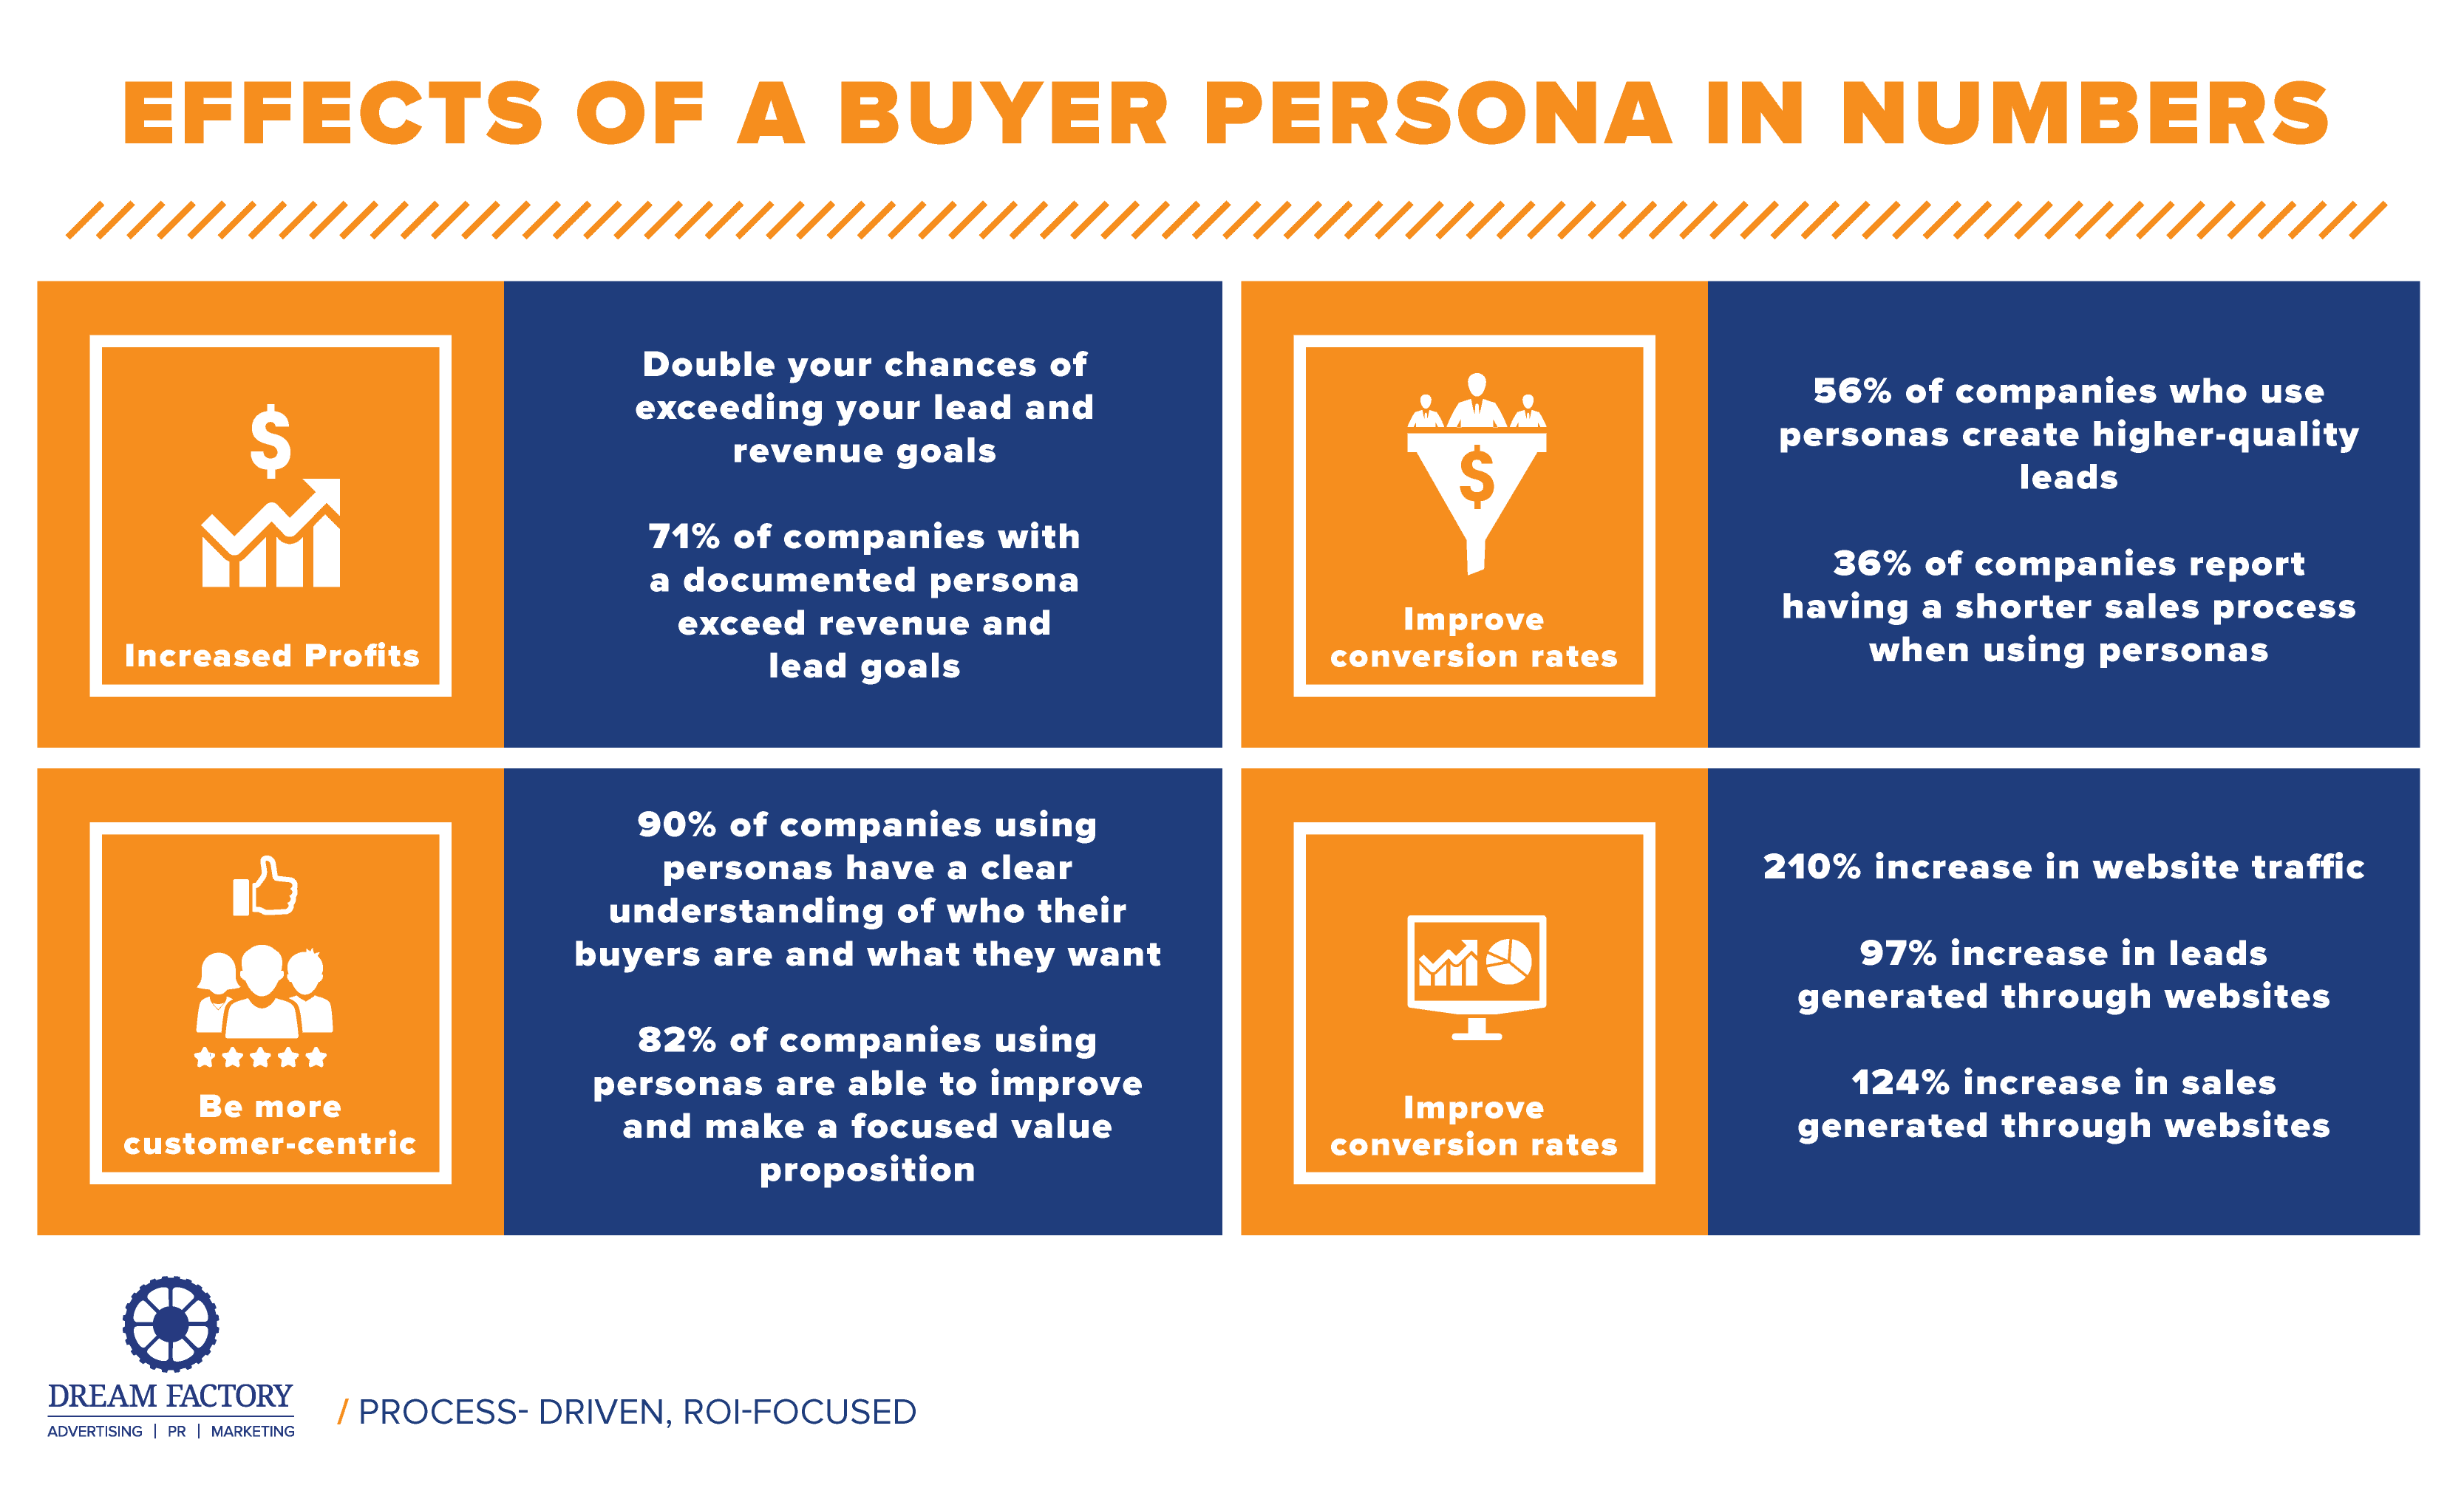 B2B Buyer Persona Infographic about the effects of a buyer person in the numbers